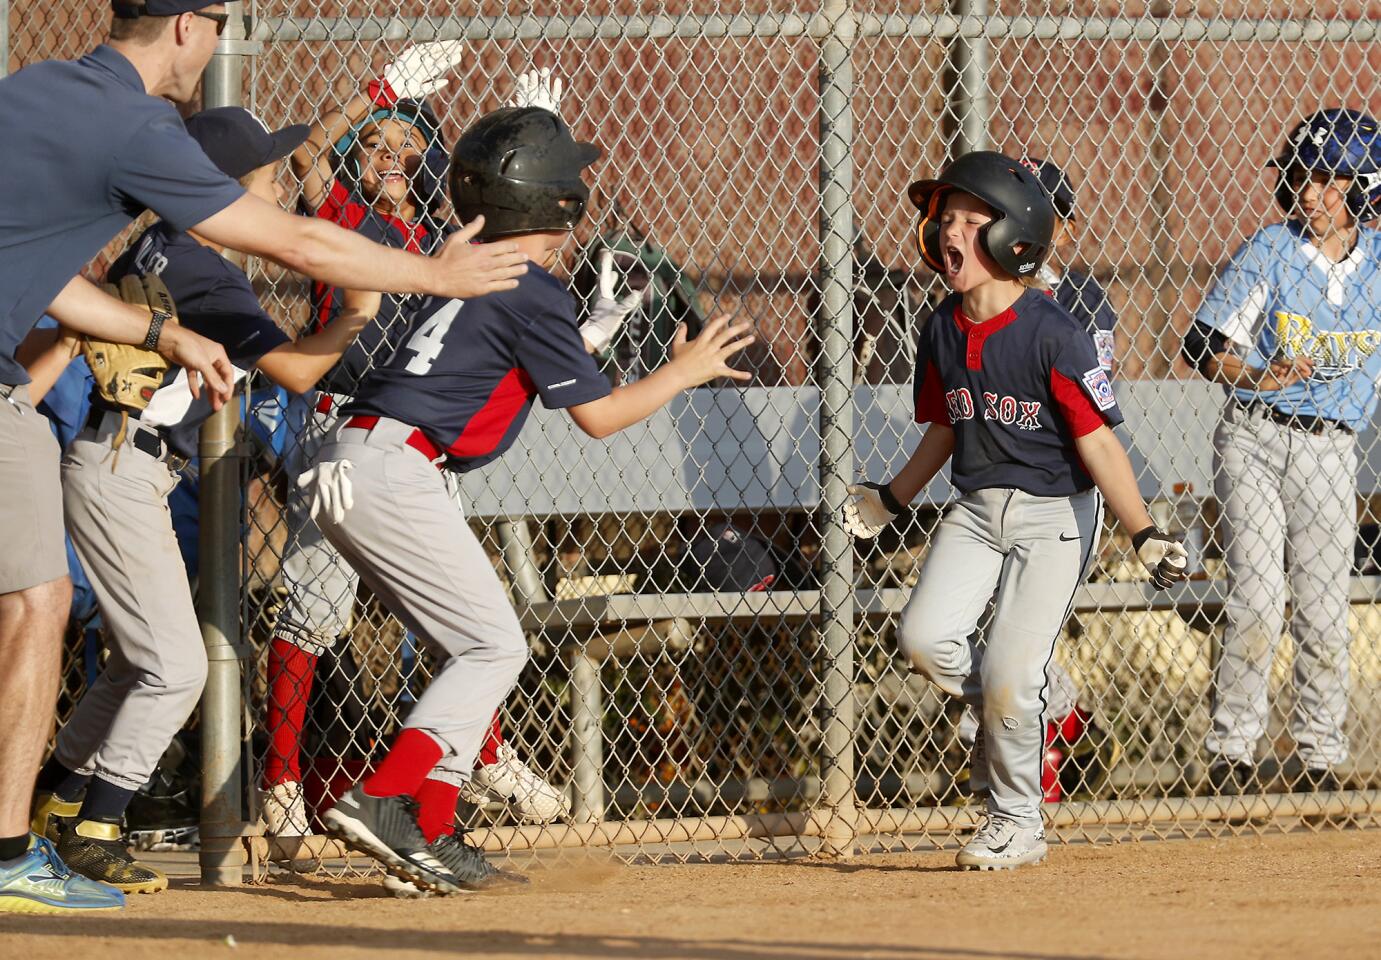 Costa Mesa American Little League's Mason Duncan, right, cheers after scoring the go-ahead run during the sixth inning against Costa Mesa National in the District 62 Tournament of Champions Minor B Division semifinals on Thursday at Ocean View Little League.